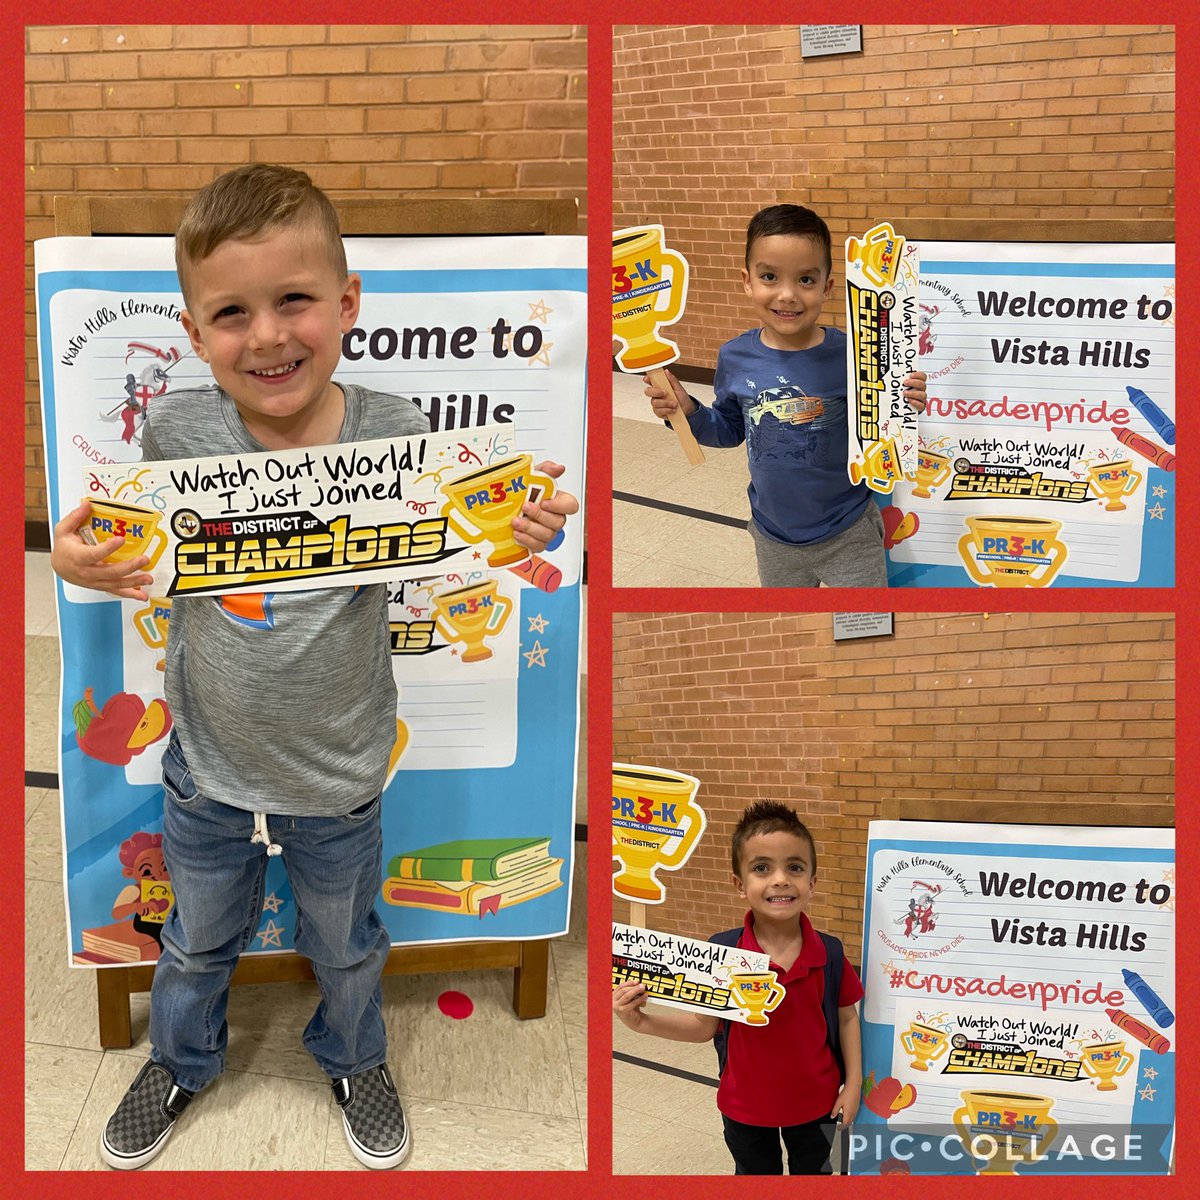 Meet some of our newest and tiniest Crusaders! Welcome to #THEDISTRICTOfChampions There’s so much to look forward to next year at Vista Hills ❤️🛡️🫶🏻 #CrusaderPride